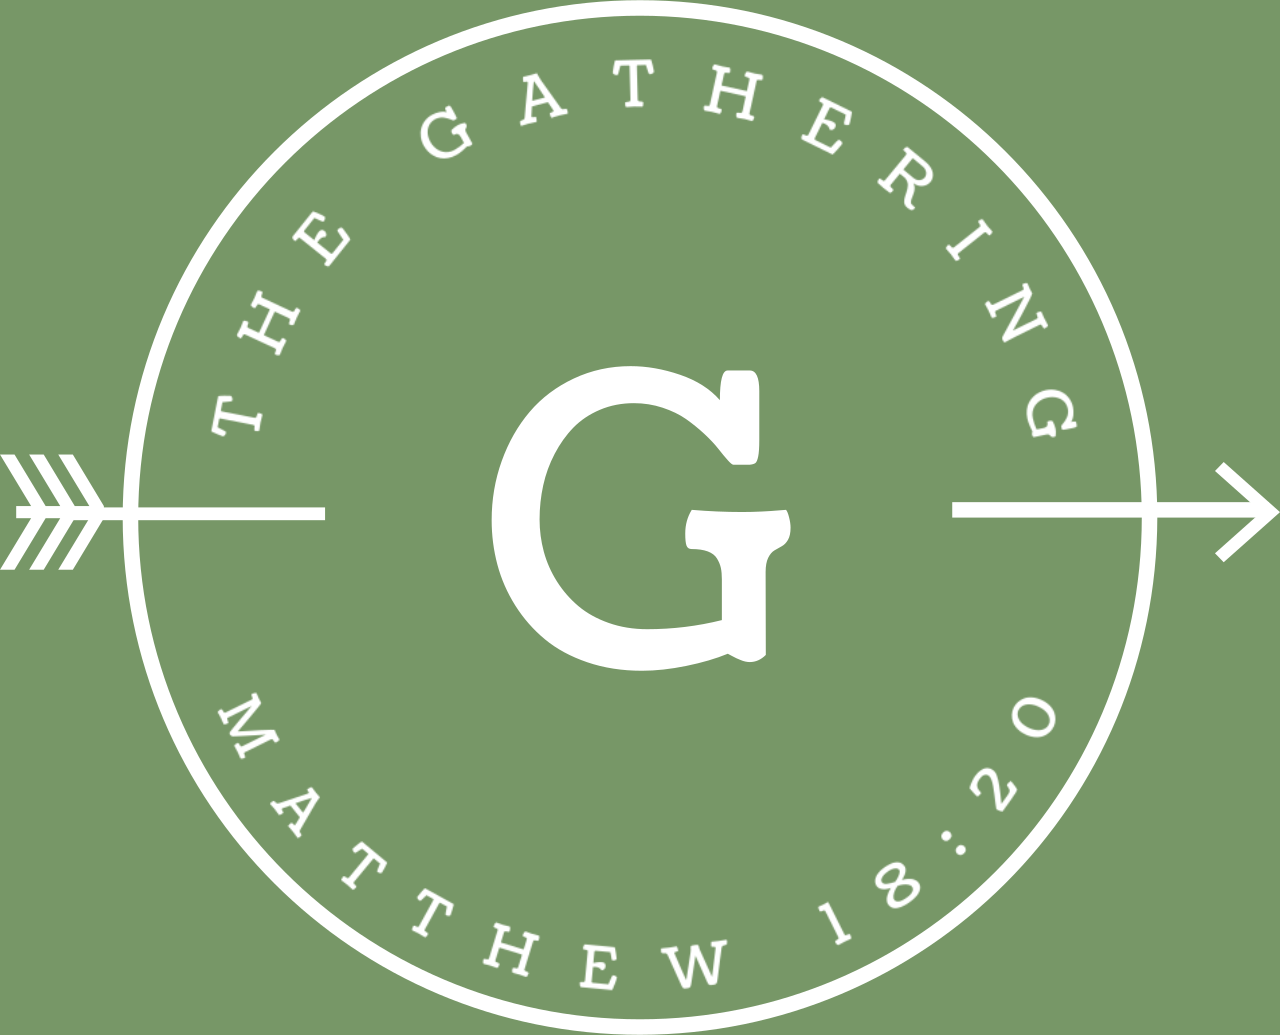 THE GATHERING's web page